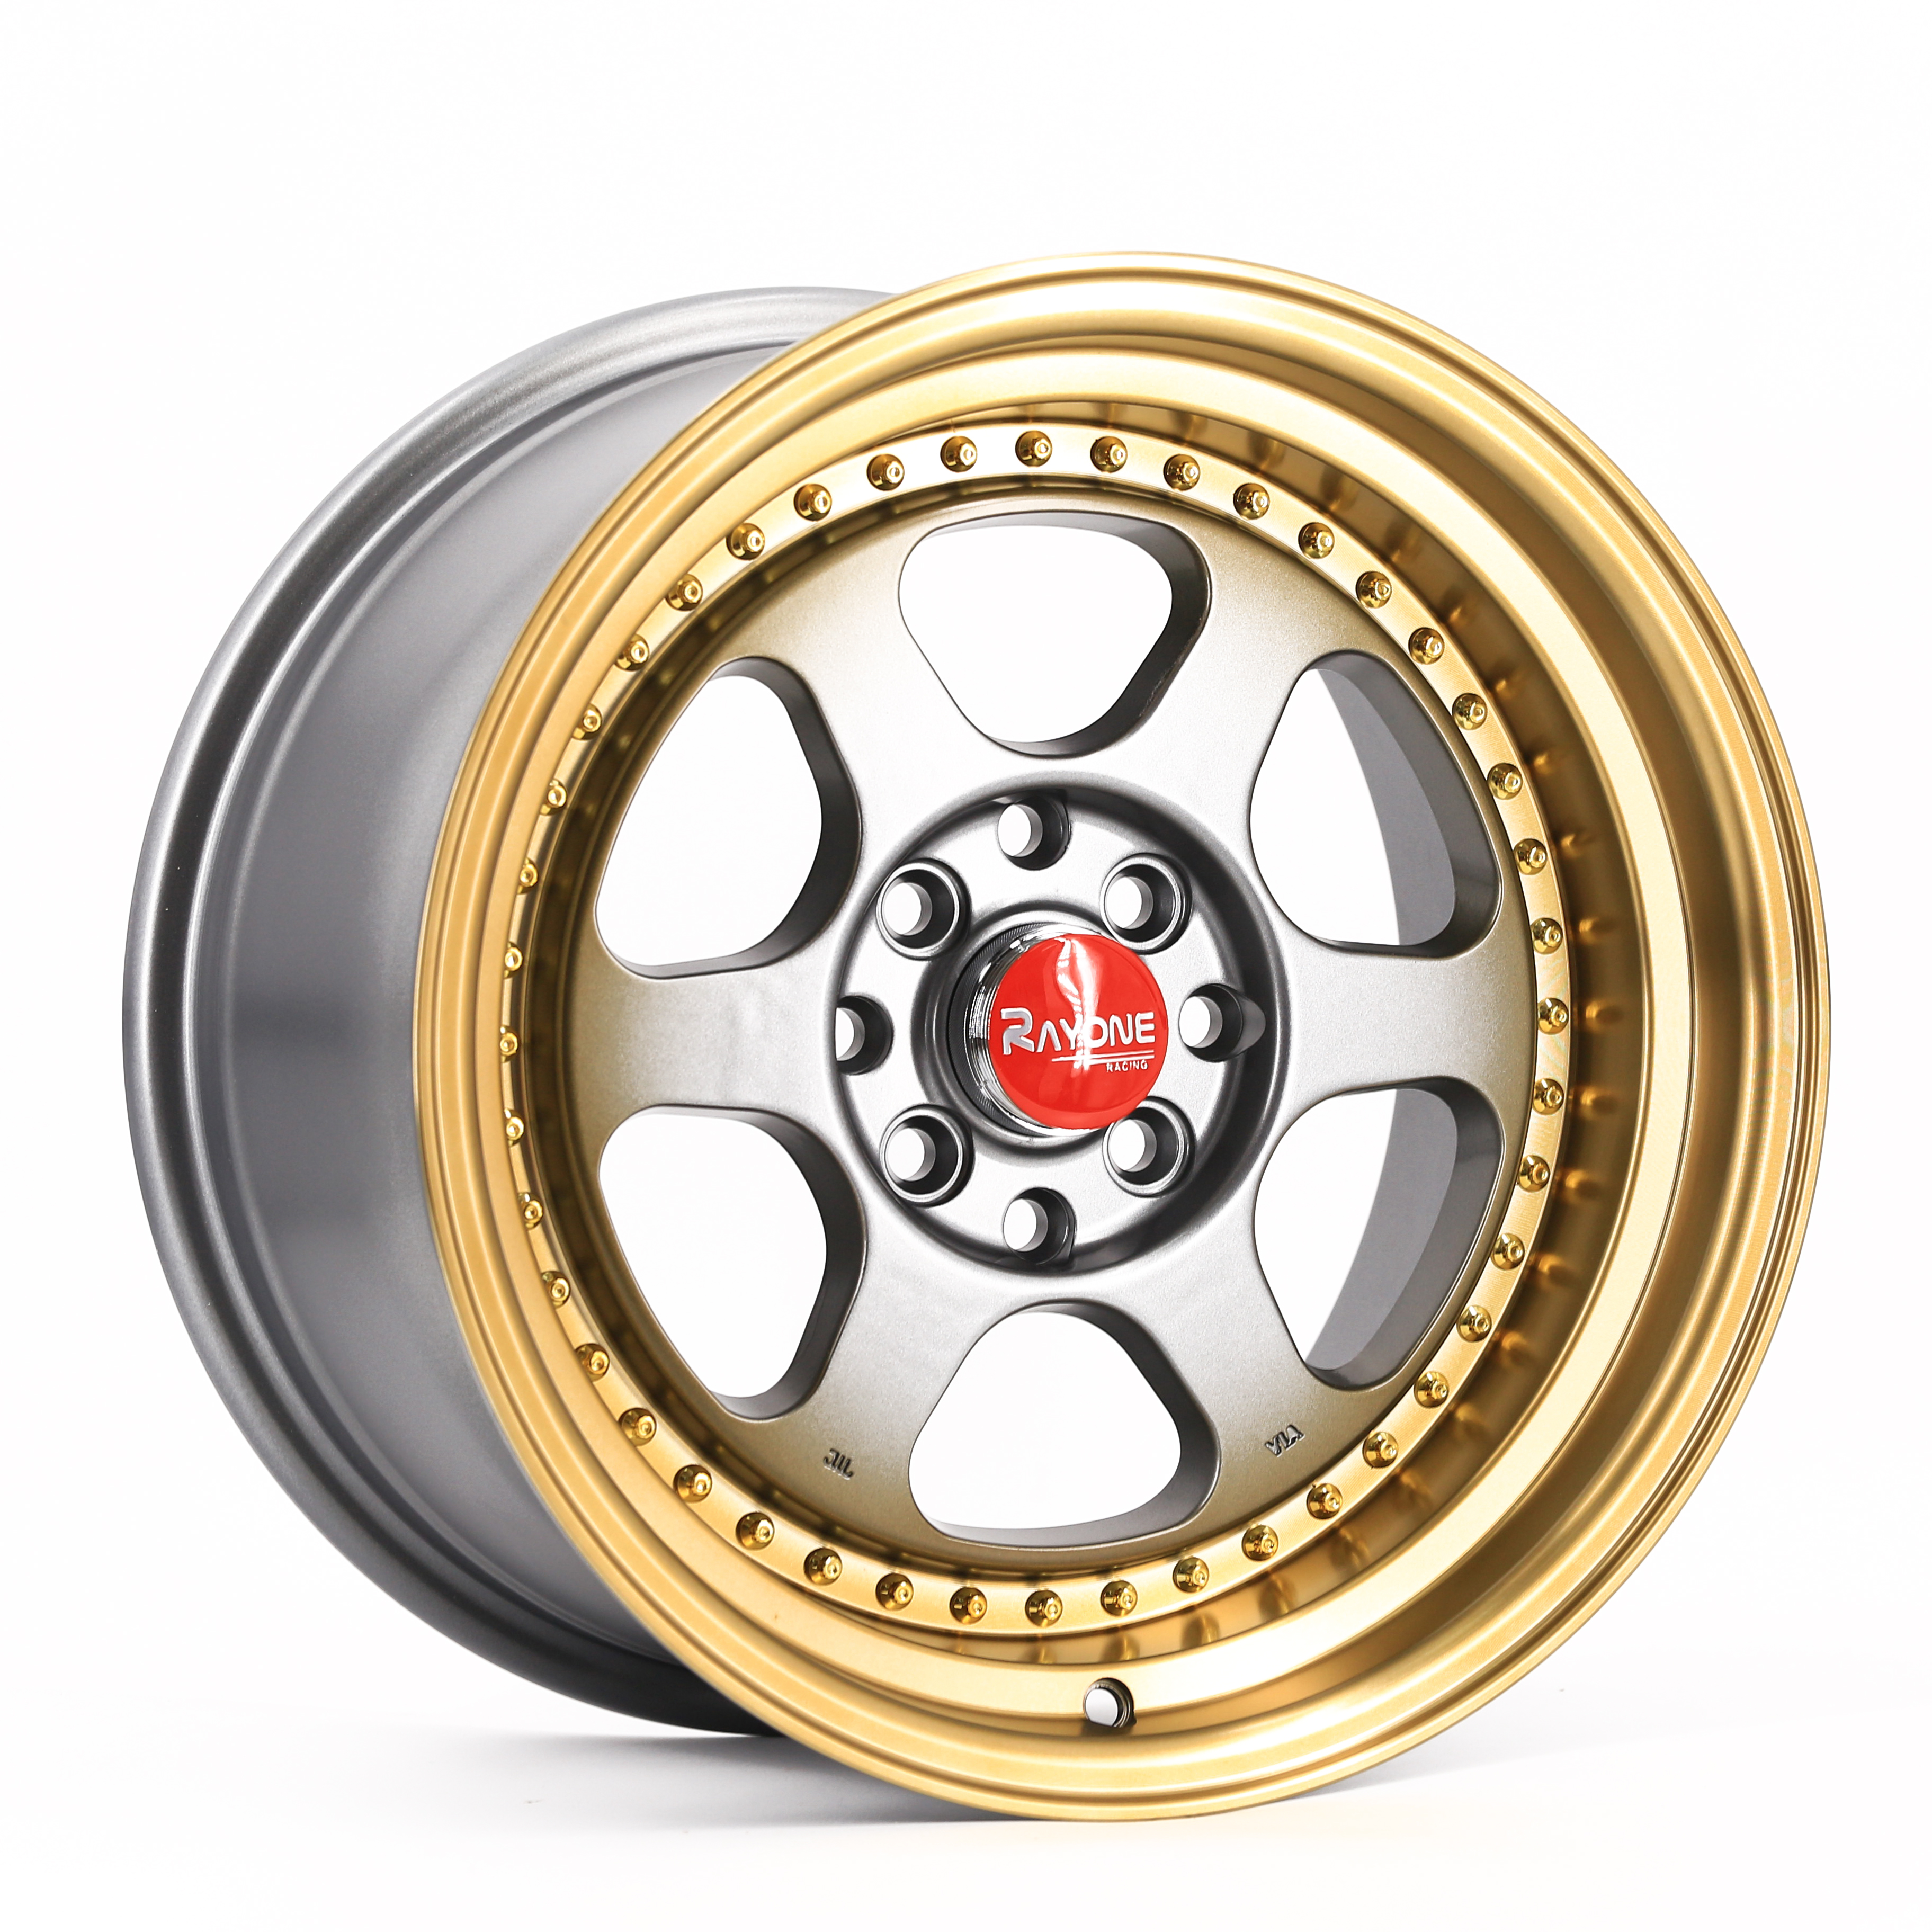 China Gold Supplier for Rotary Forged Truck Wheels - Gold Color Deep Dish Rivets 4 Hole Rims 15 Inch Alloy Wheels For Racing Car – Rayone